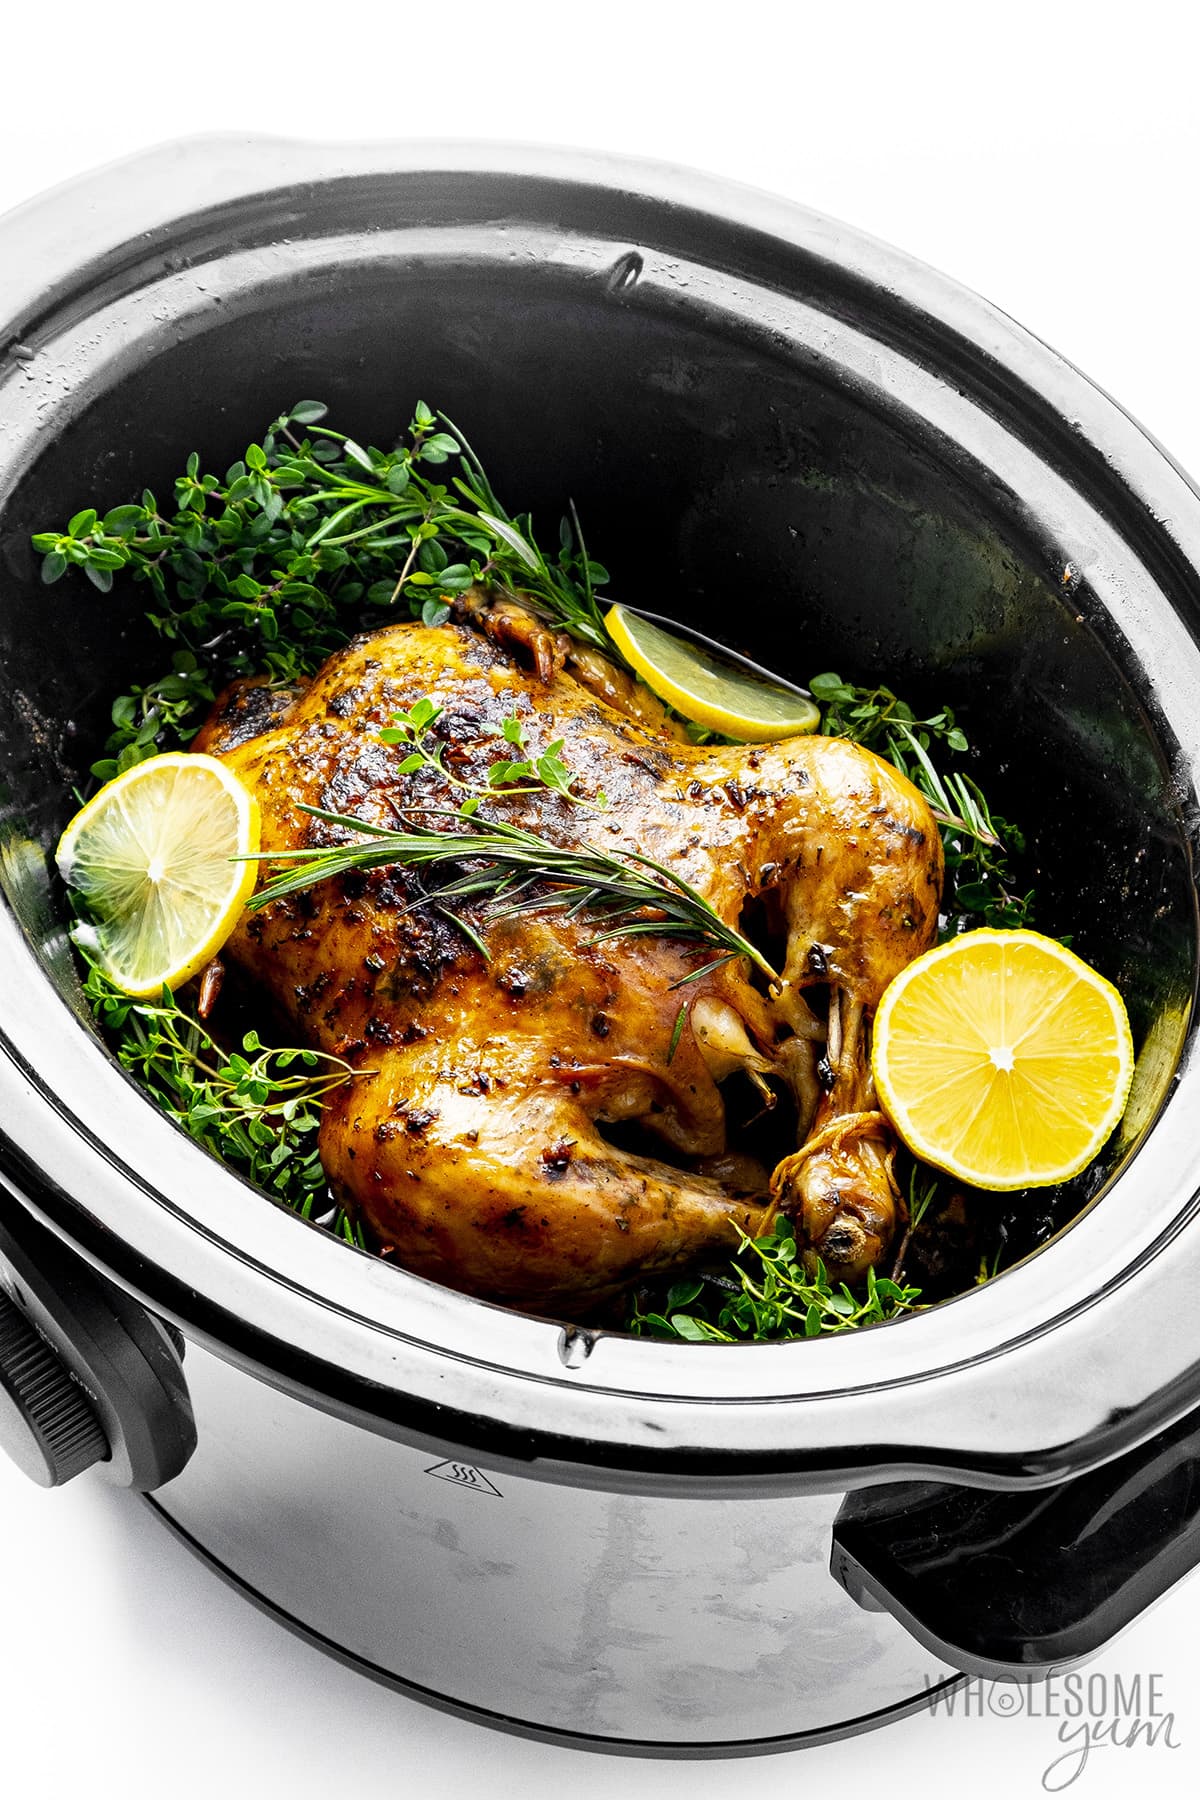 Whole chicken in Crock Pot with herbs and lemon.